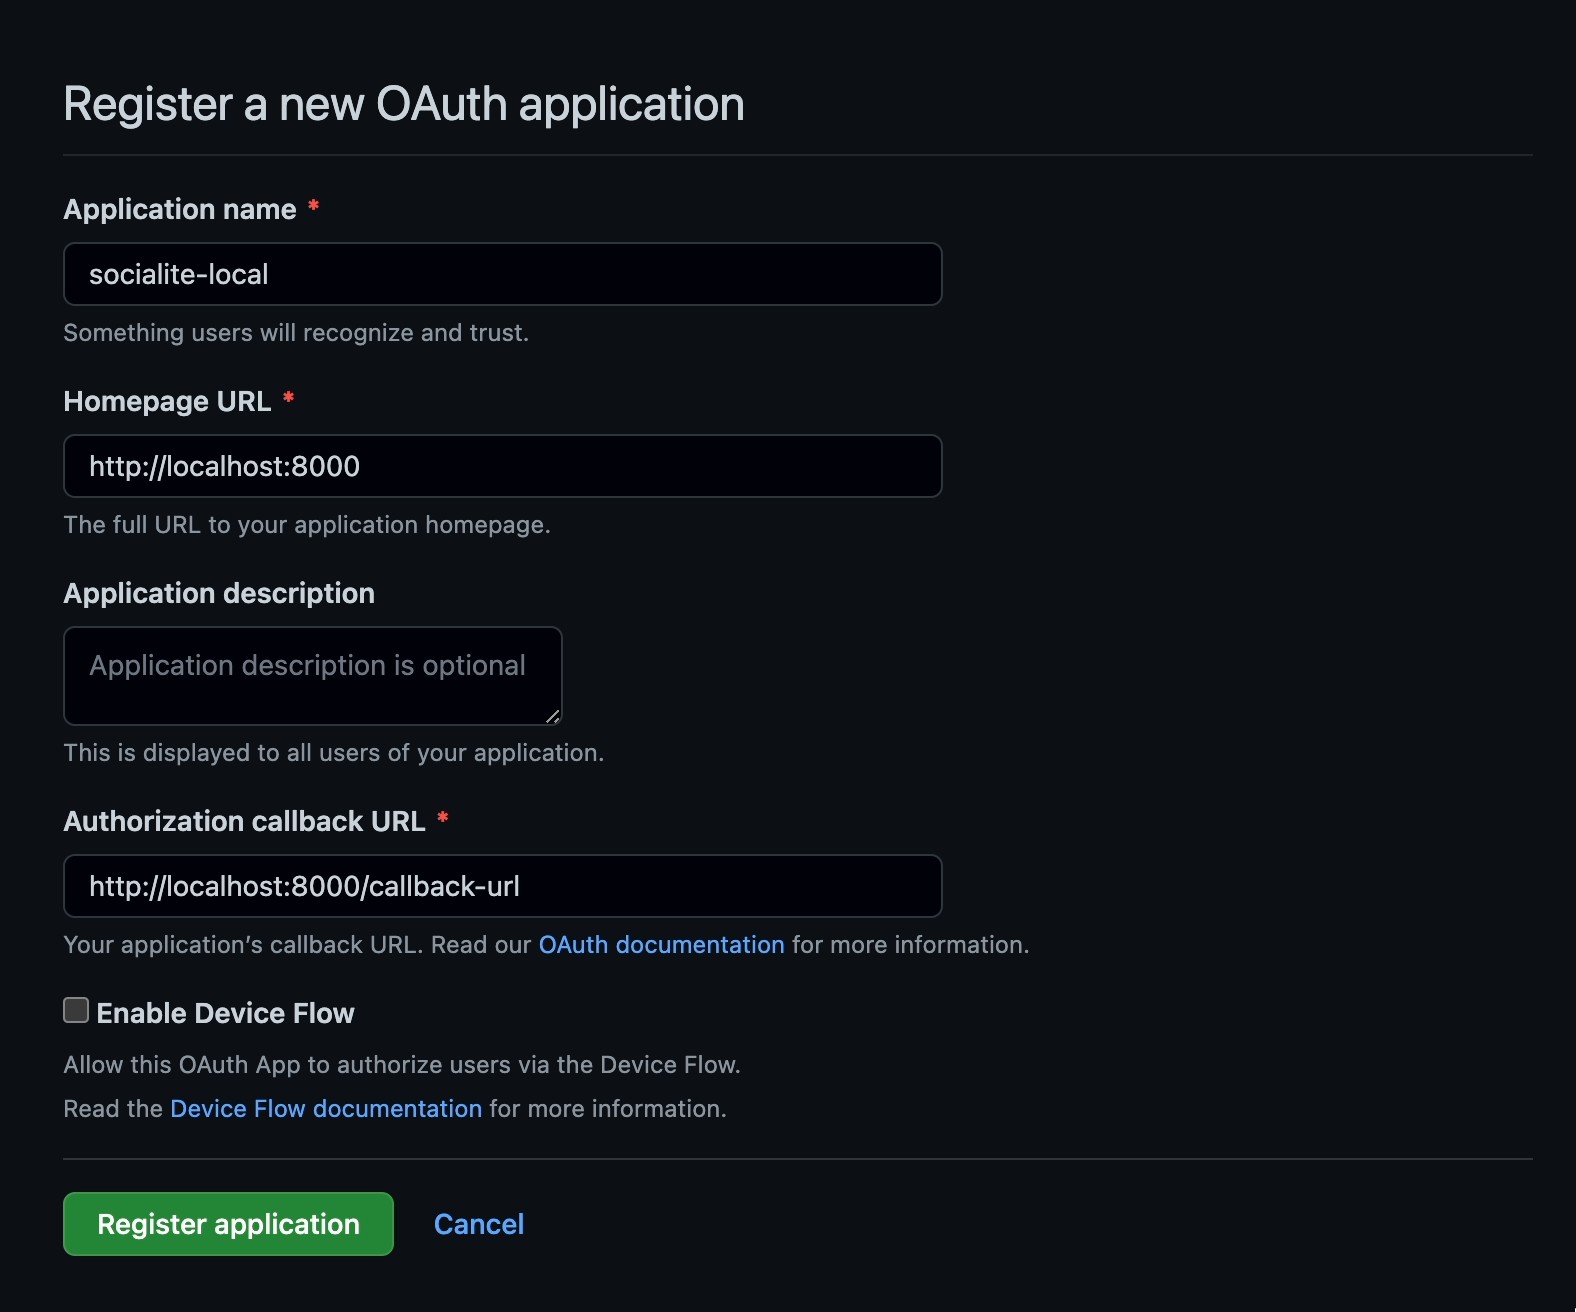 The GitHub OAuth register a new OAuth application form